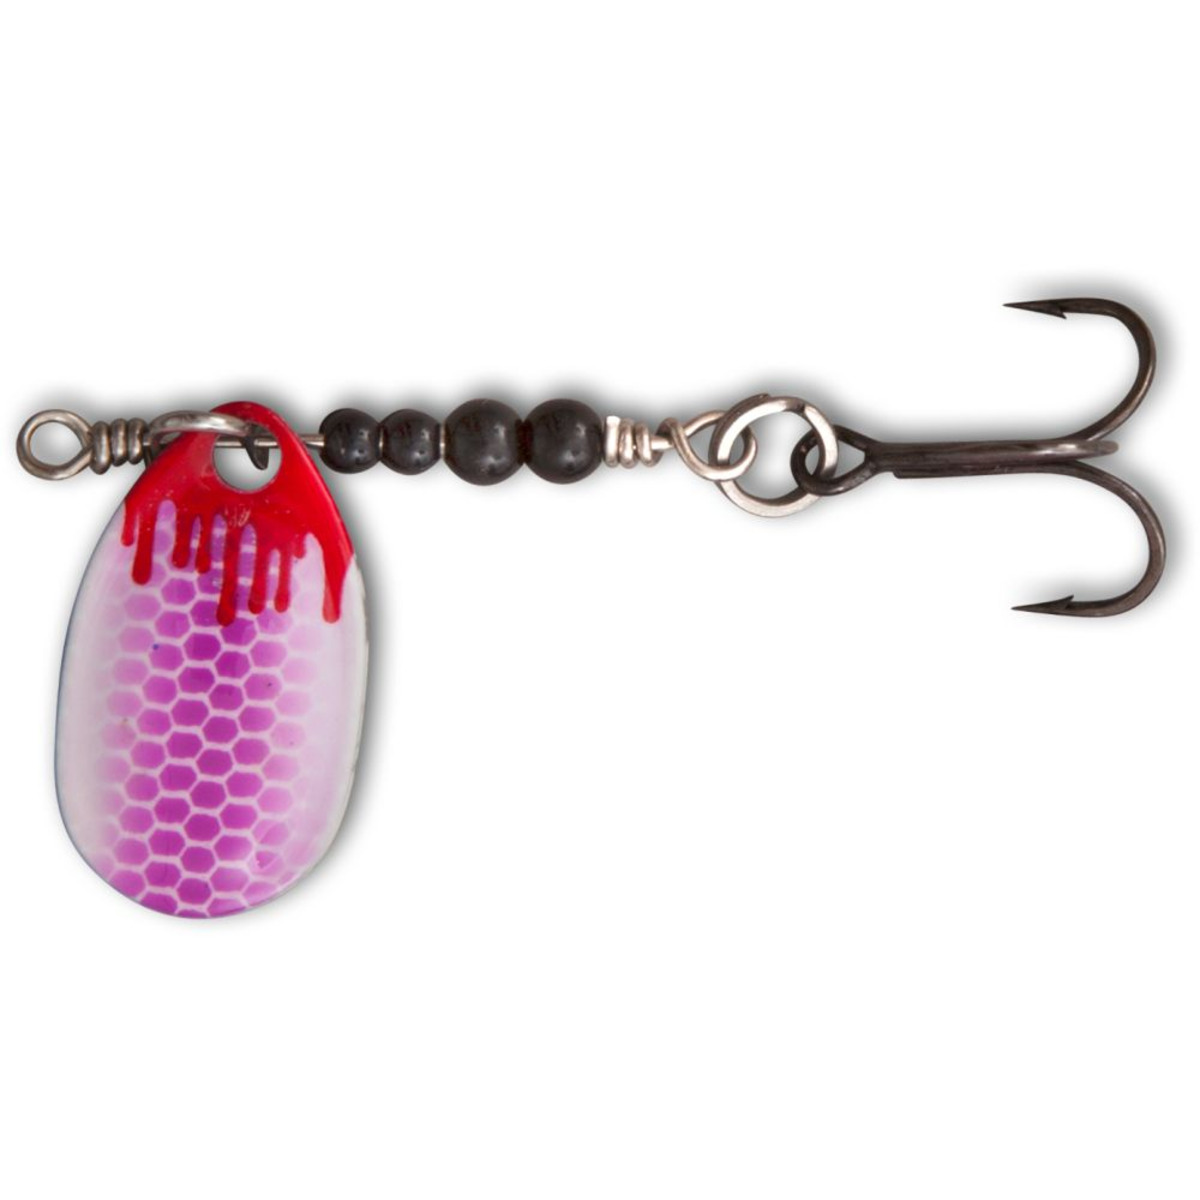 Magic Trout Bloody Ul Spinner - pink/white